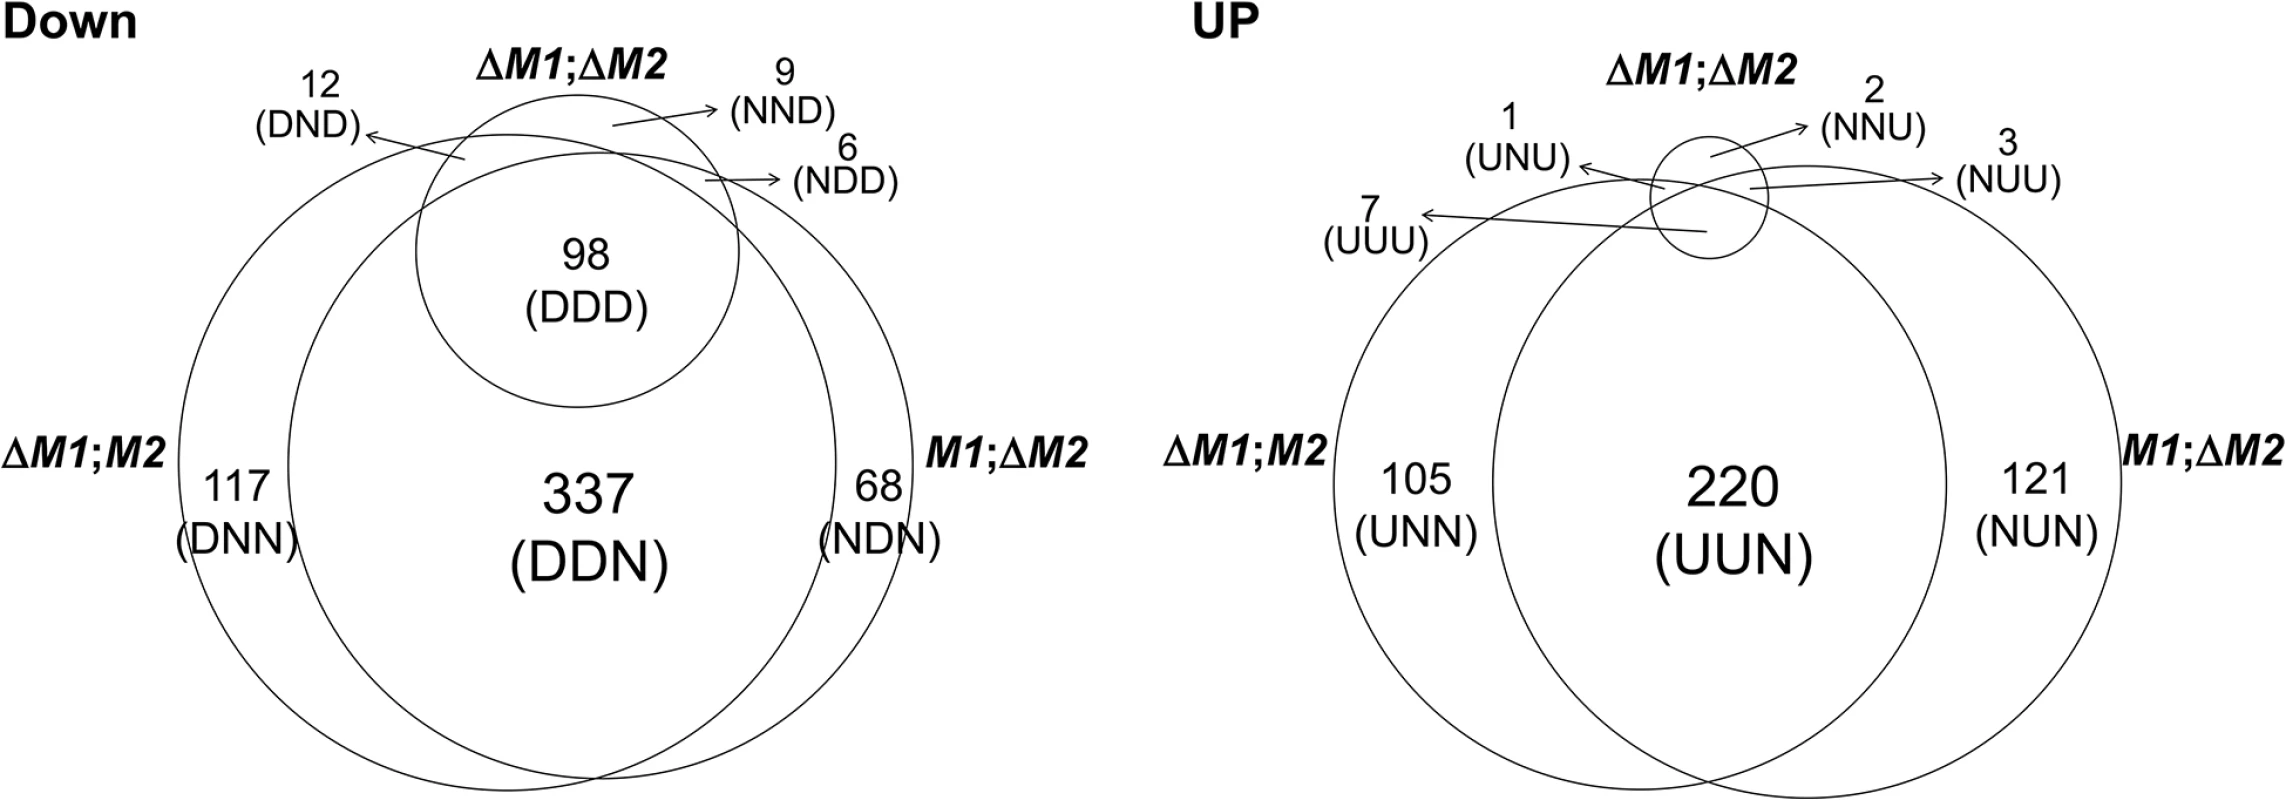 Number of genes expressed differentially in the <i>F</i>. <i>graminearum</i> strains deleted for the <i>MAT1-1</i> locus (0394<i>M1</i>;<i>M2</i>), <i>MAT1-2</i> locus (<i>M1</i>; Δ<i>M2</i>), and both <i>MAT1-1</i> and <i>MAT1-2</i> loci (Δ<i>M1</i>; Δ <i>M2</i>) compared to their wild-type progenitor Z3643.